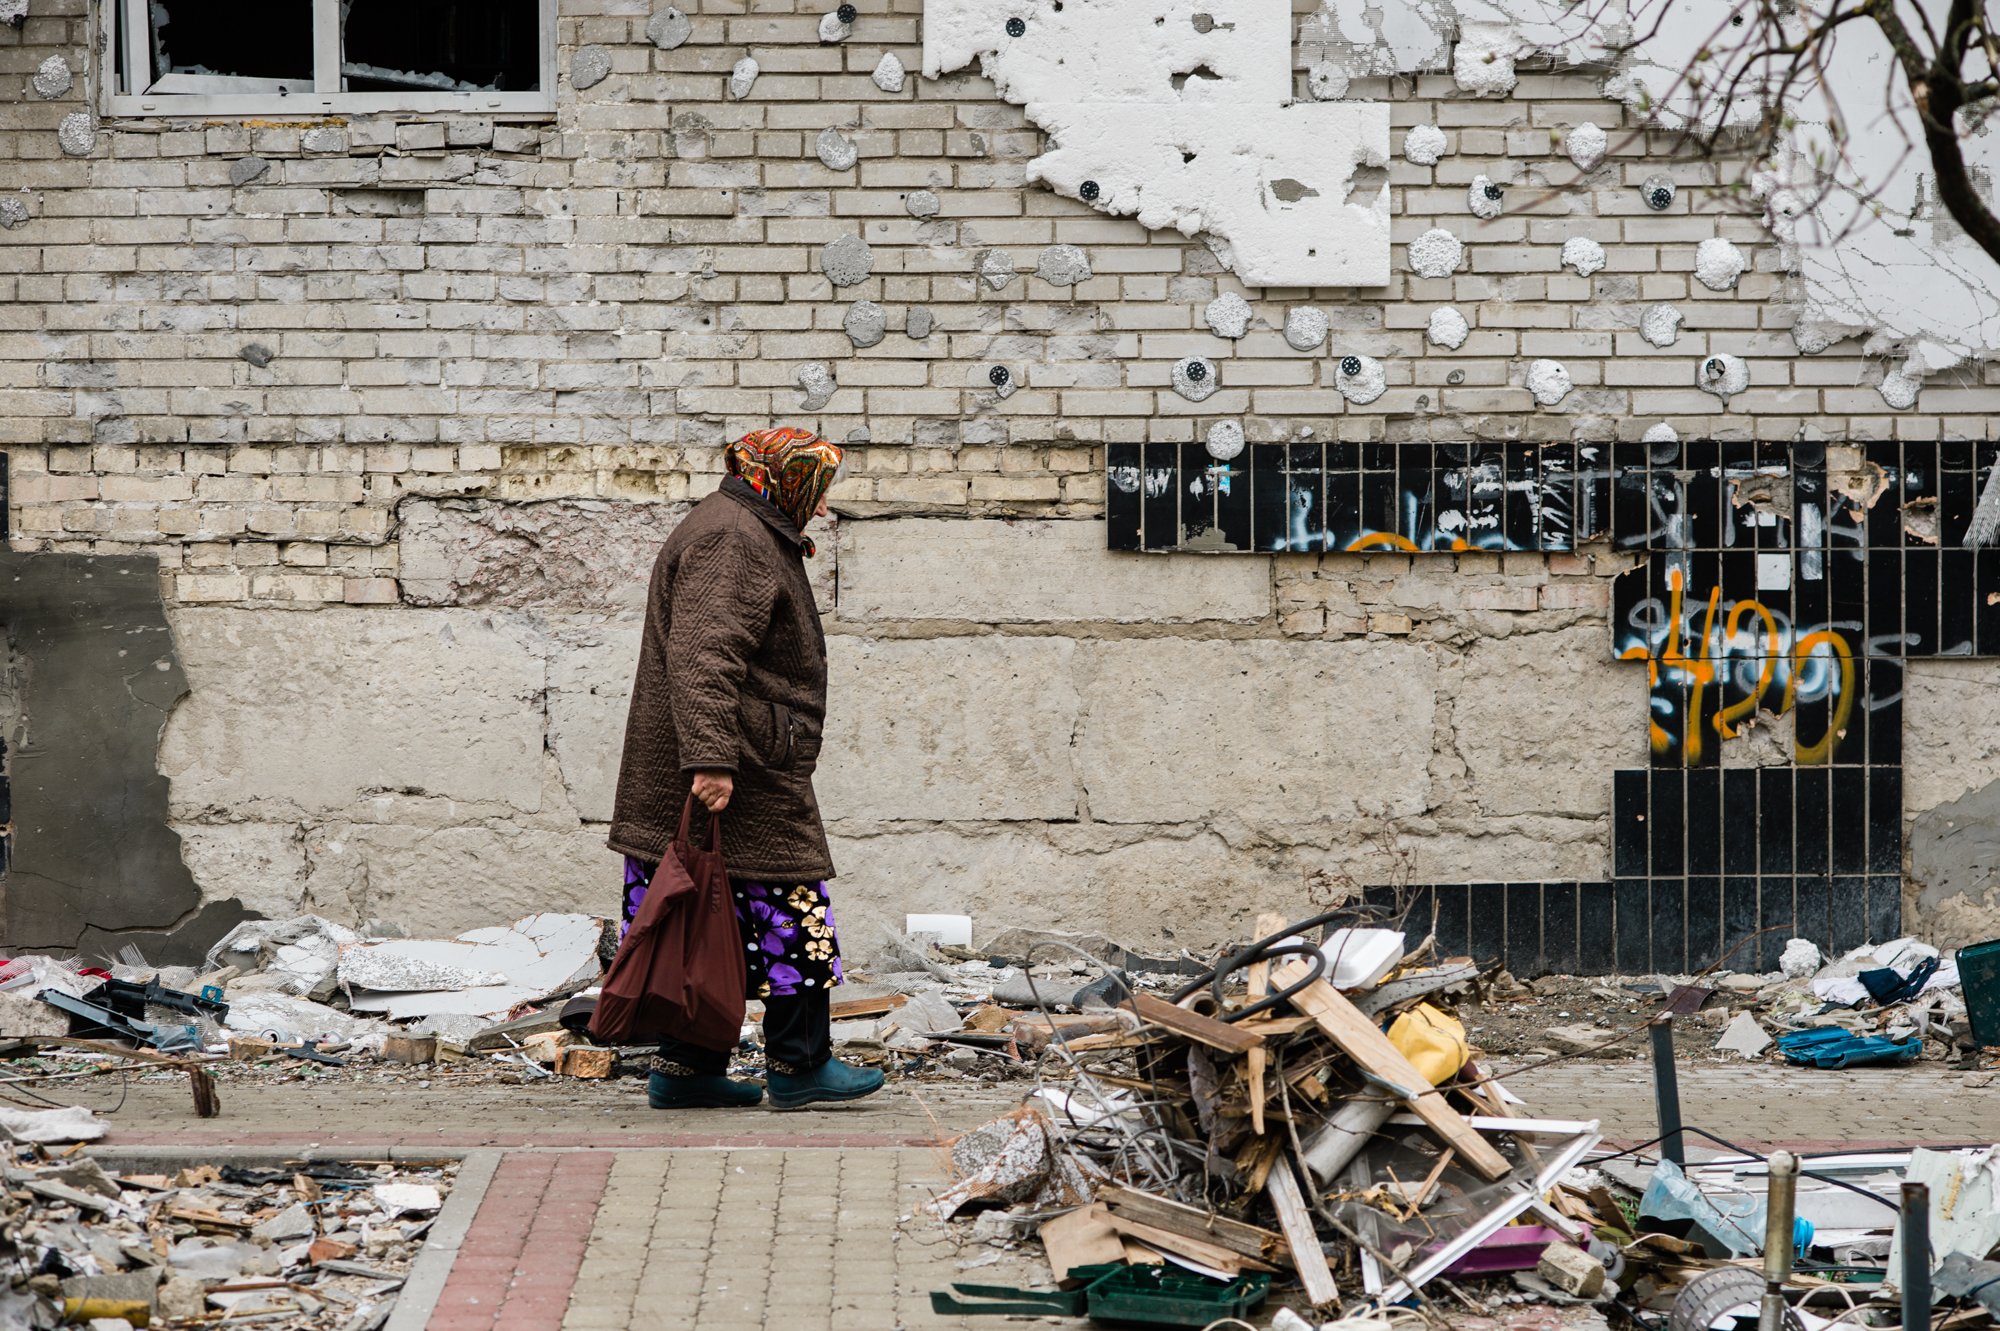  An old woman walks by the remains of a building hit by Russian missiles, Irpin, Ukraine 